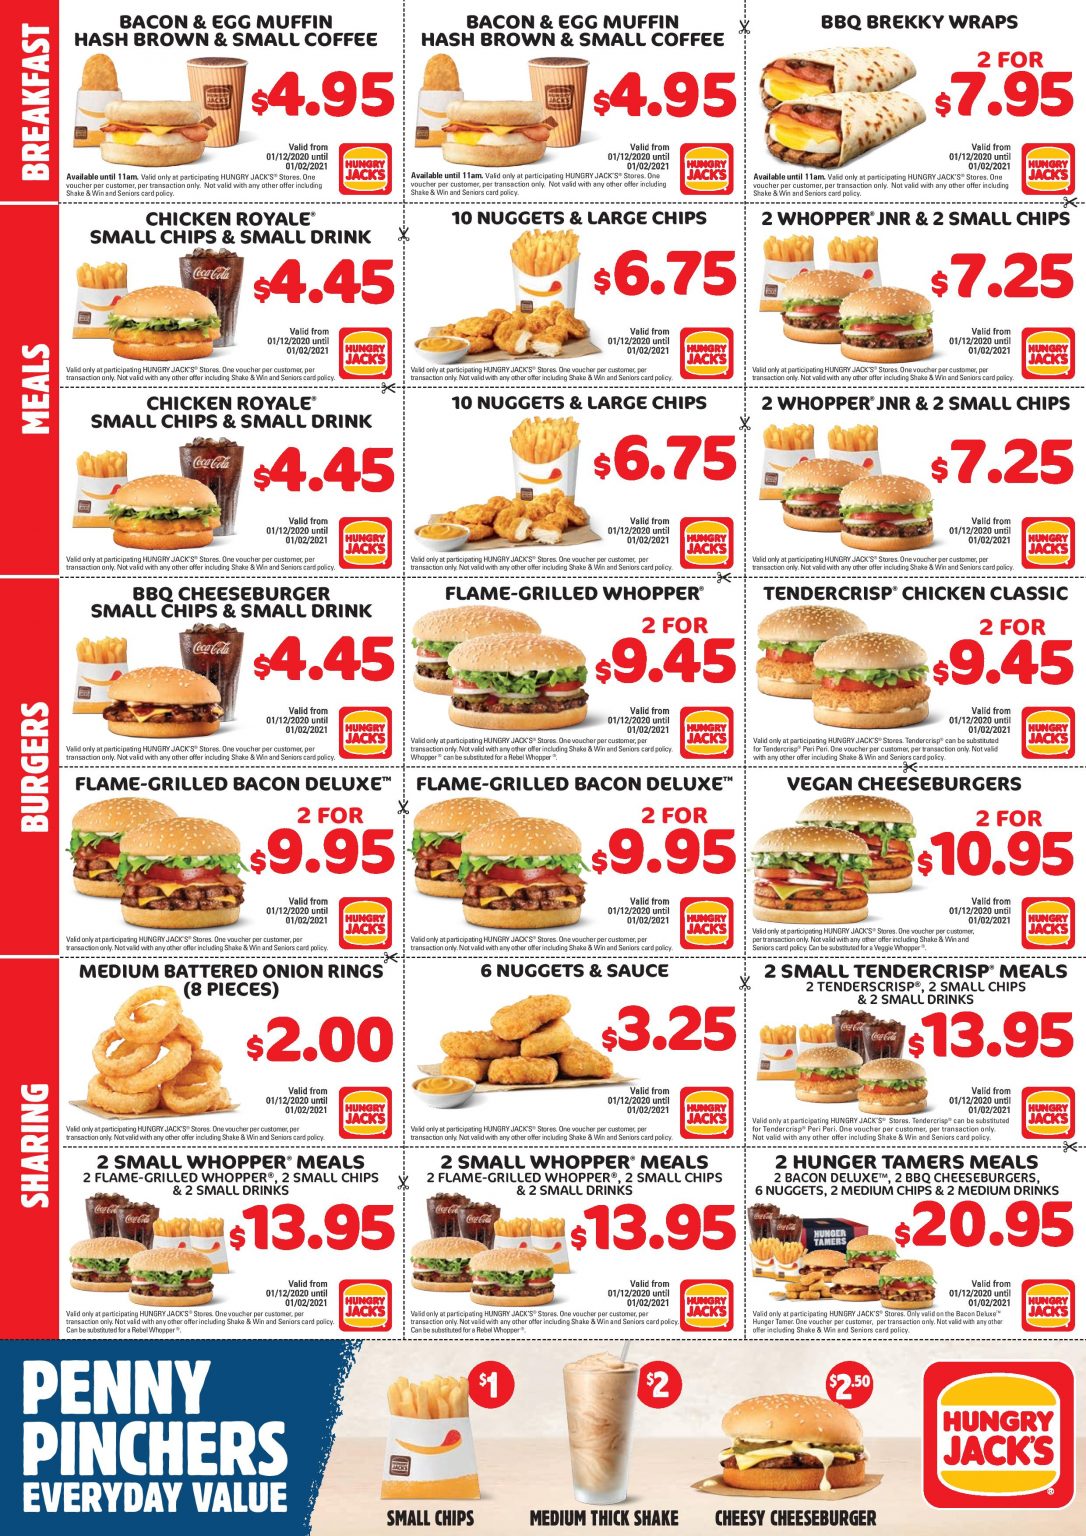 Hungry Jacks Vouchers Valid Until 1 February 2021 Main 1086x1536 